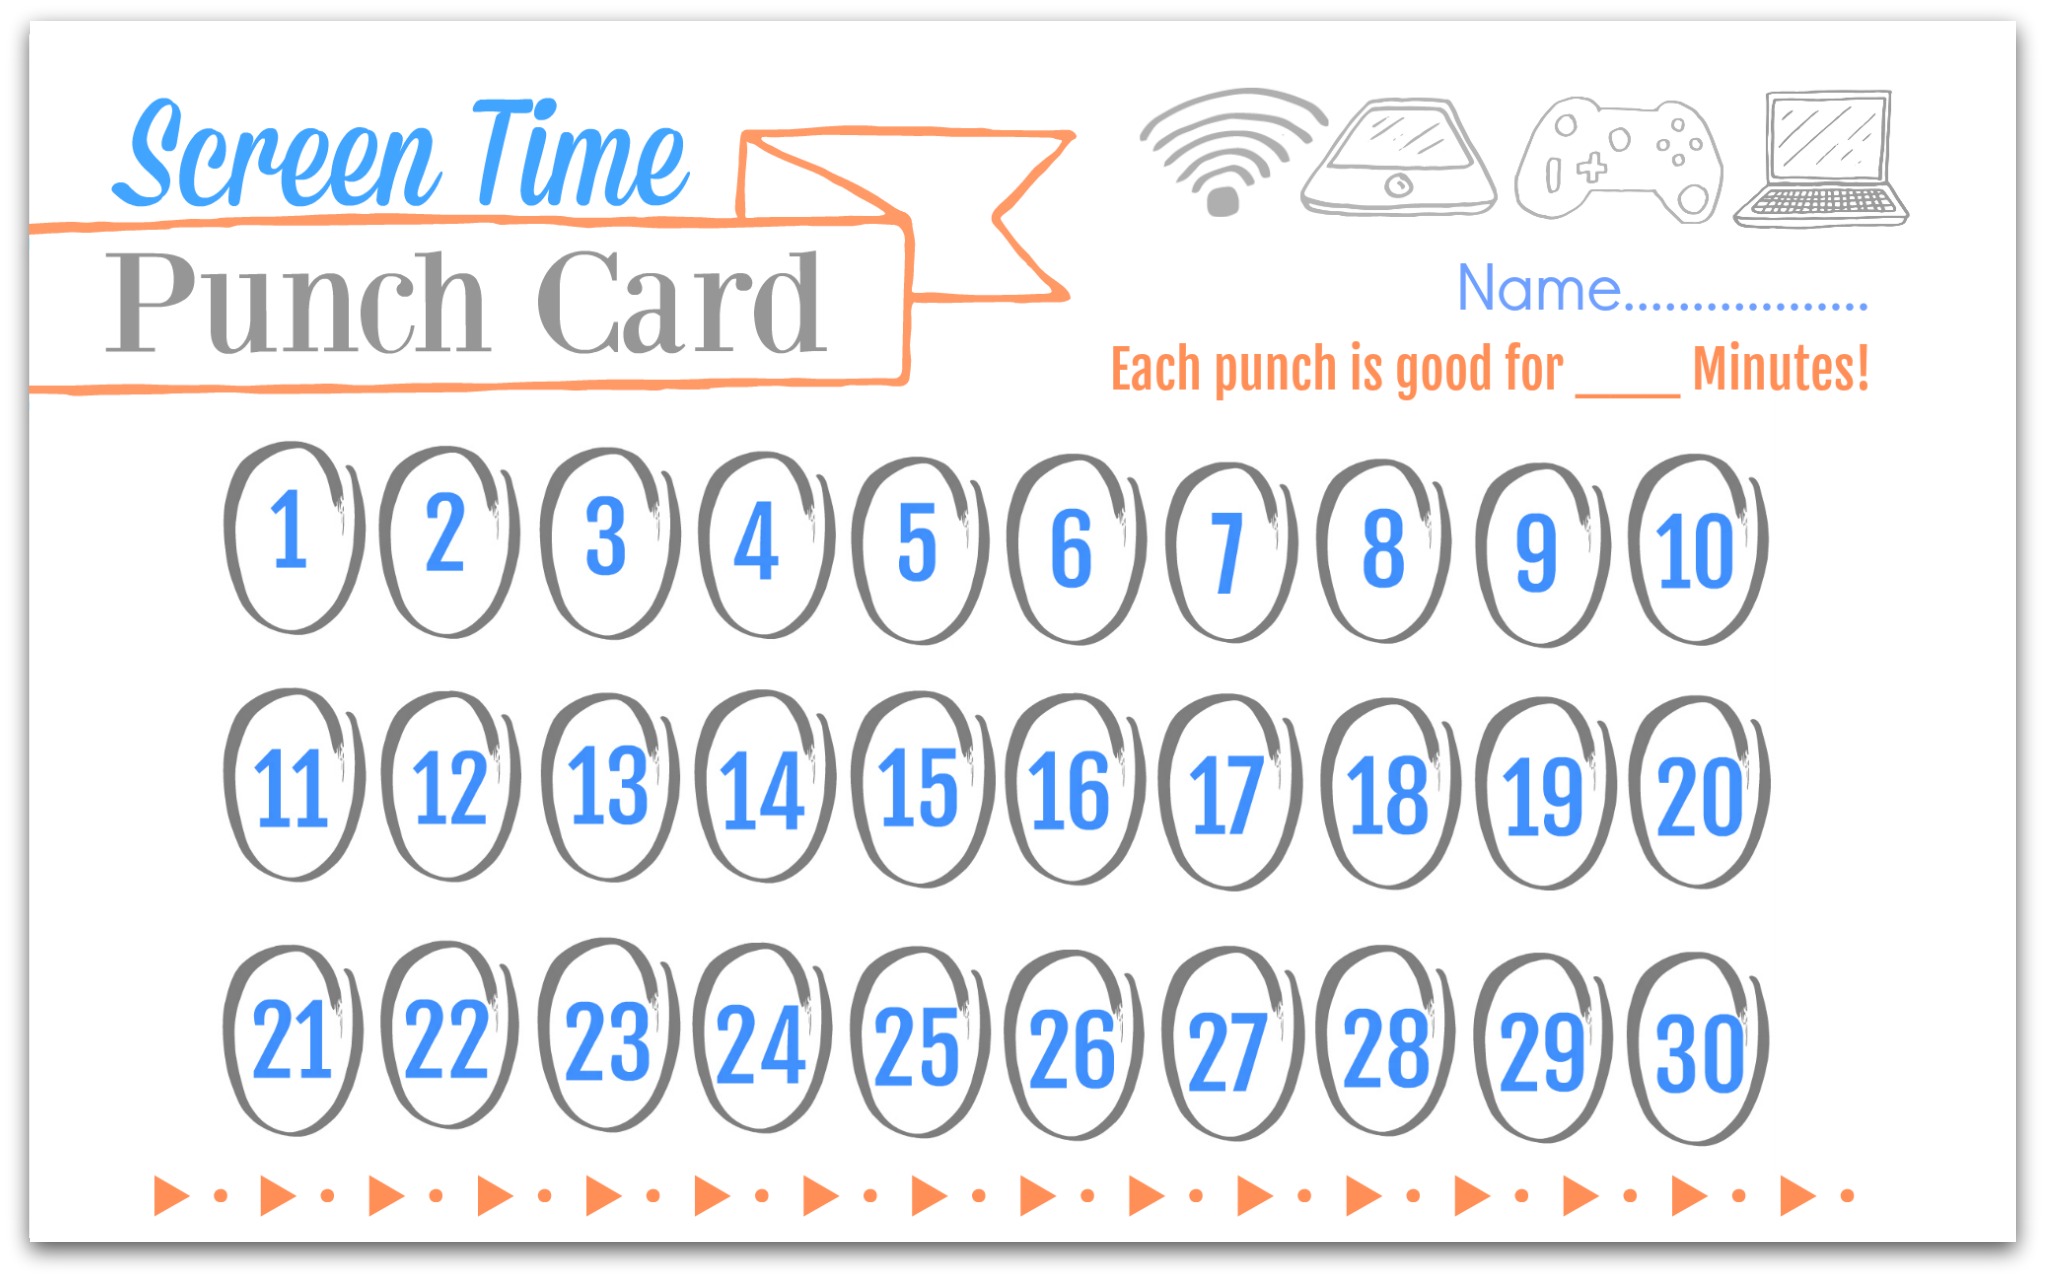 free printable reading punch card – screen time punch card